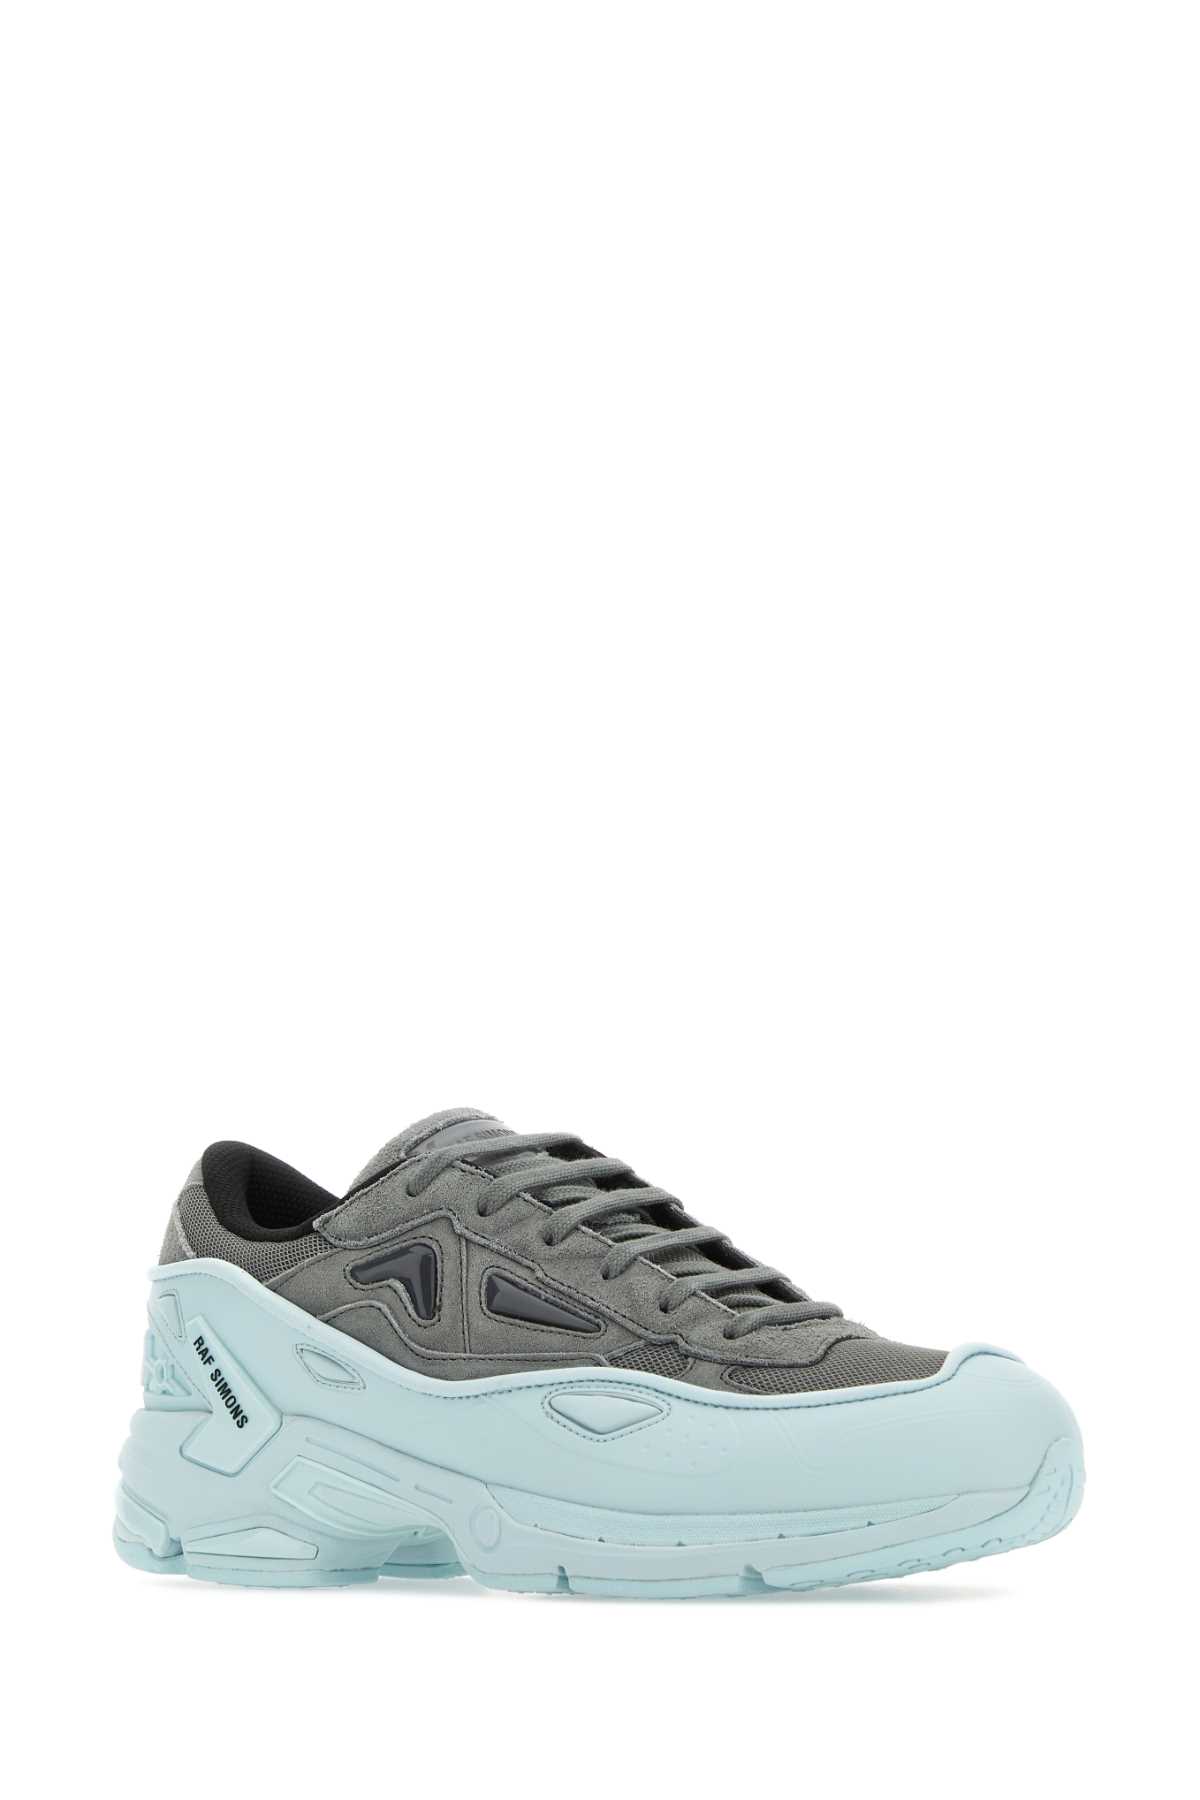 Raf Simons Two-tone Pharaxus Sneakers In Greyquill